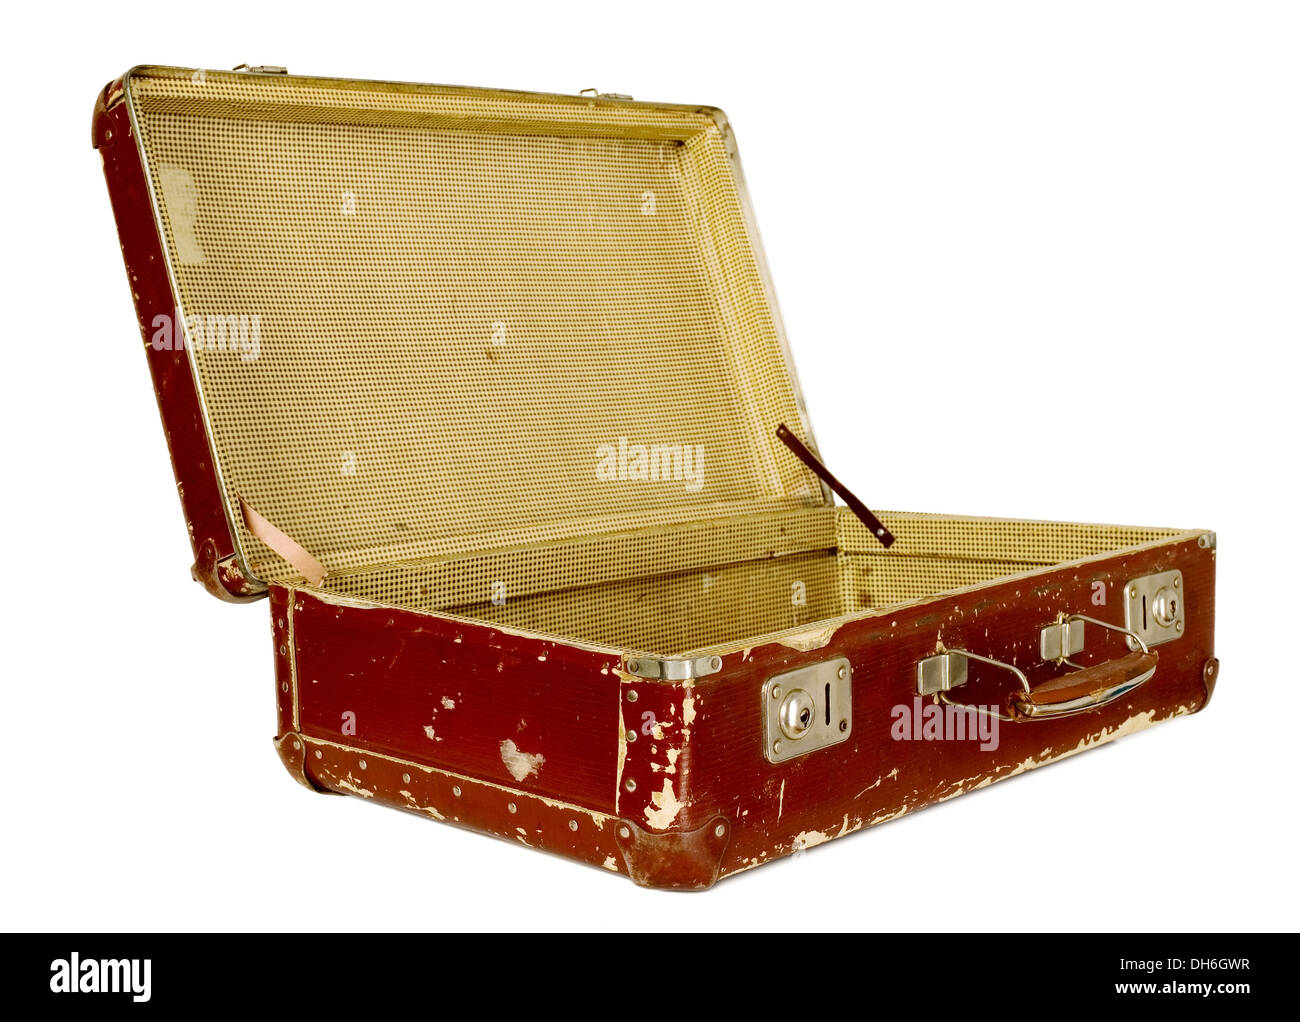 Vintage old brown suitcase on white isolated background Stock Photo - Alamy